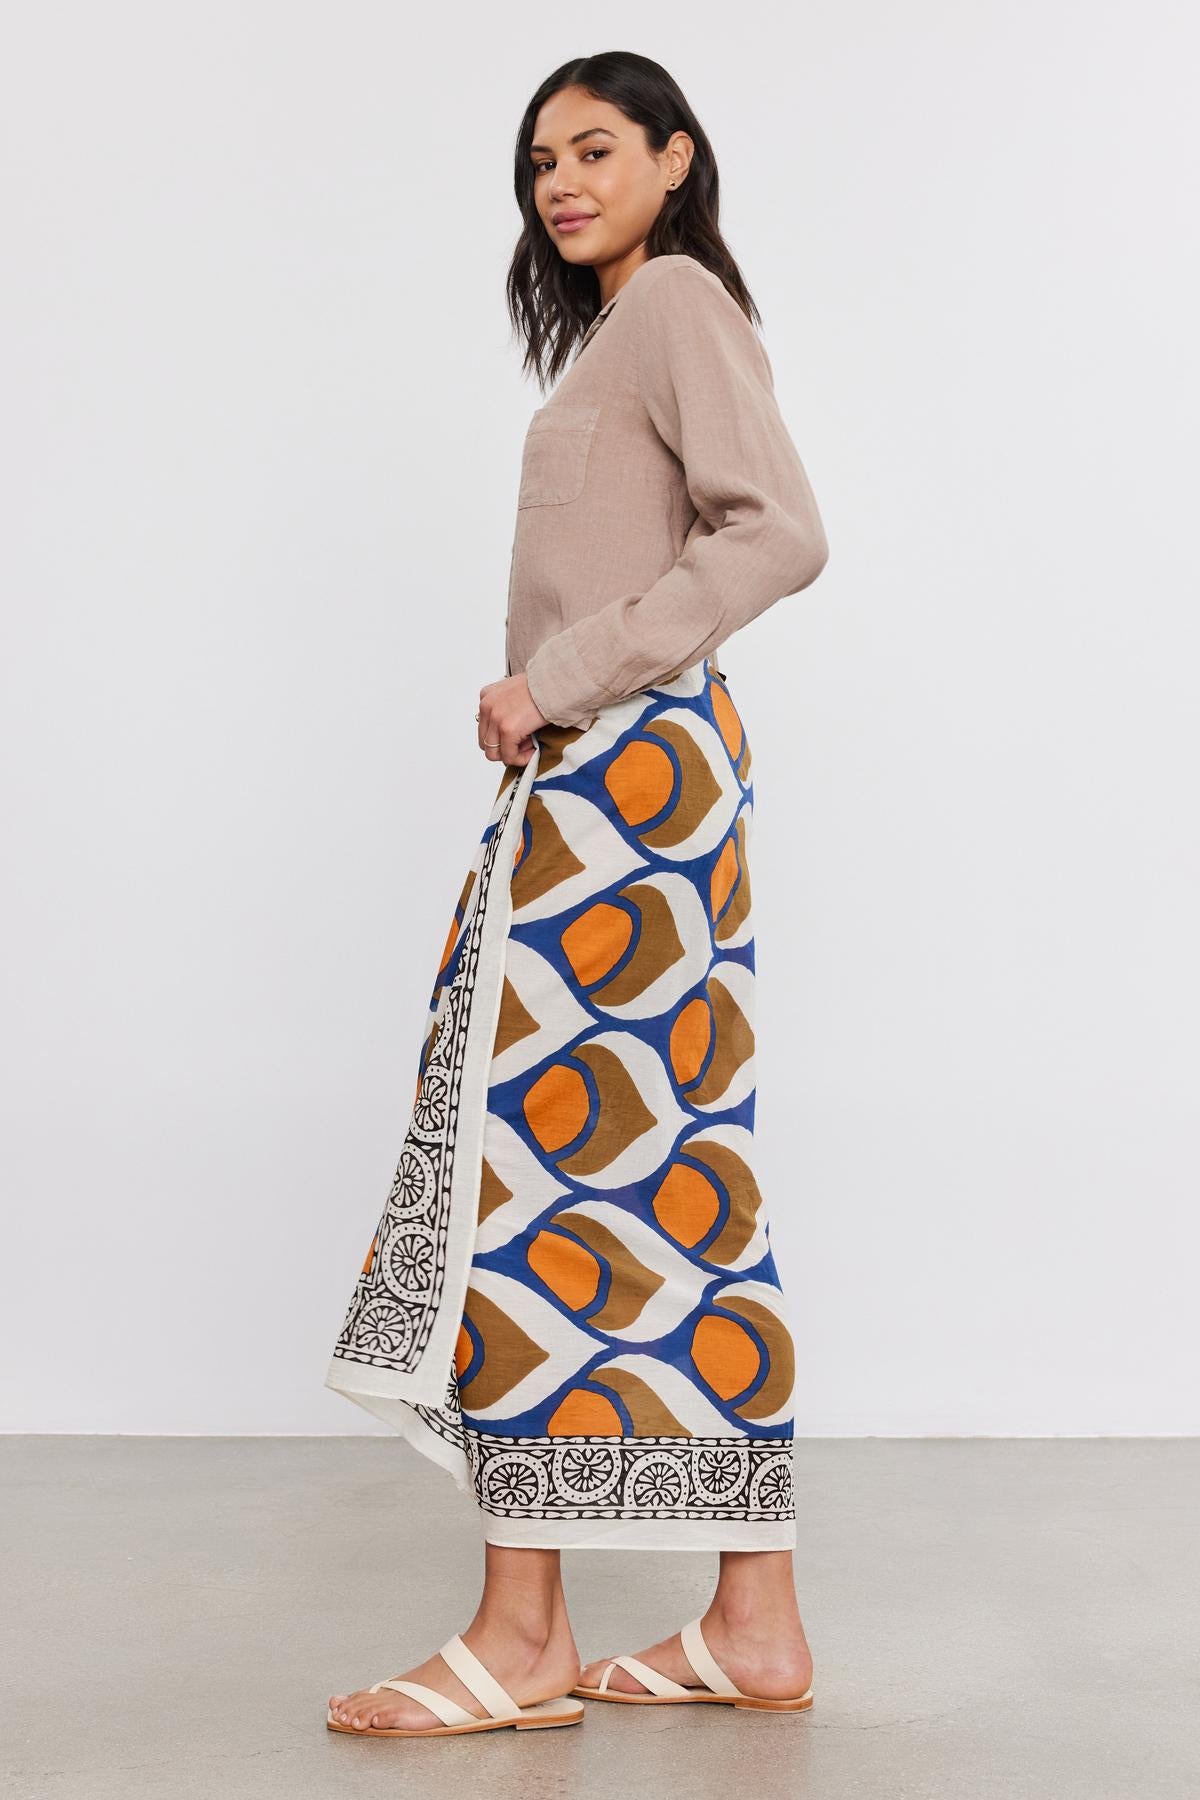 Woman standing sideways, wearing a beige blouse, colorful printed skirt, and white sandals by Velvet by Graham & Spencer, holding a SARONG WRAP bag, looking over her shoulder.-36752949149889